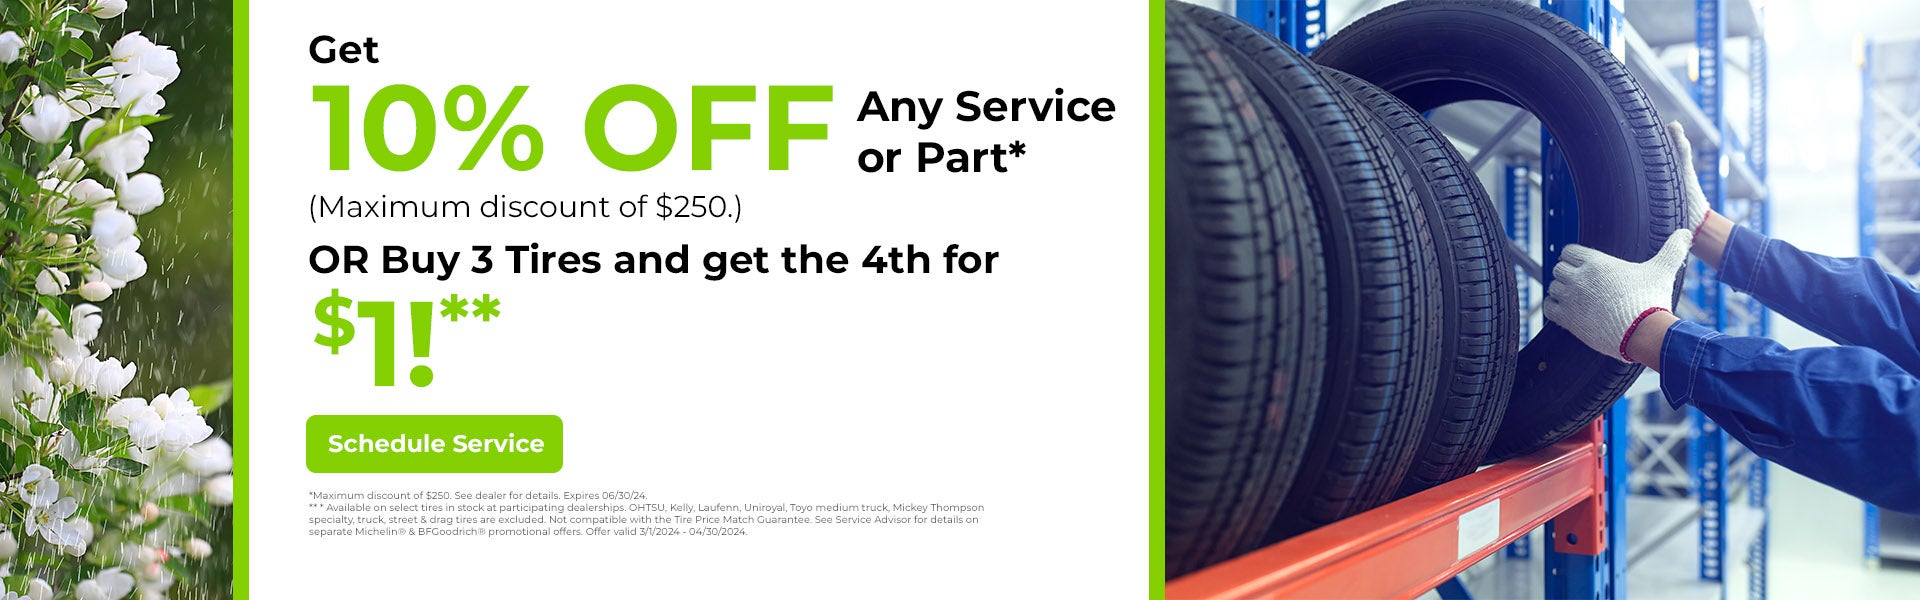 Get 10% Off any Service or Part